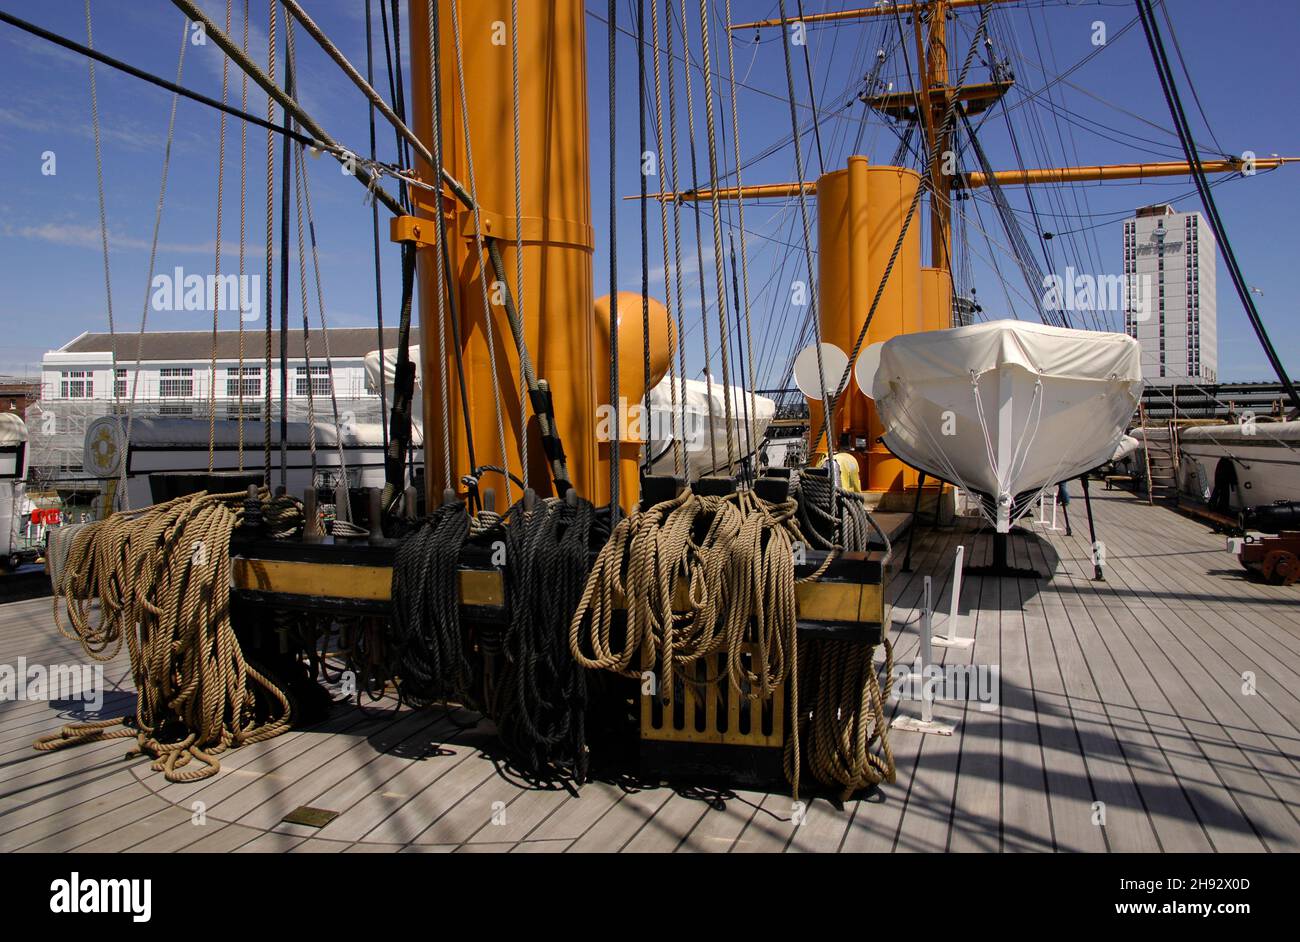 AJAXNETPHOTO. 4TH JUNE, 2015. PORTSMOUTH, ENGLAND. - HMS WARRIOR 1860 - FIRST AND LAST IRONCLAD WARSHIP OPEN TO THE PUBLIC. VIEW LOOKING FORWARD ALONG UPPER DECK; MAINMAST BITTS TABERNACLE IN FOREGROUND.PHOTO:JONATHAN EASTLAND/AJAX REF:D150406 5225 Stock Photo